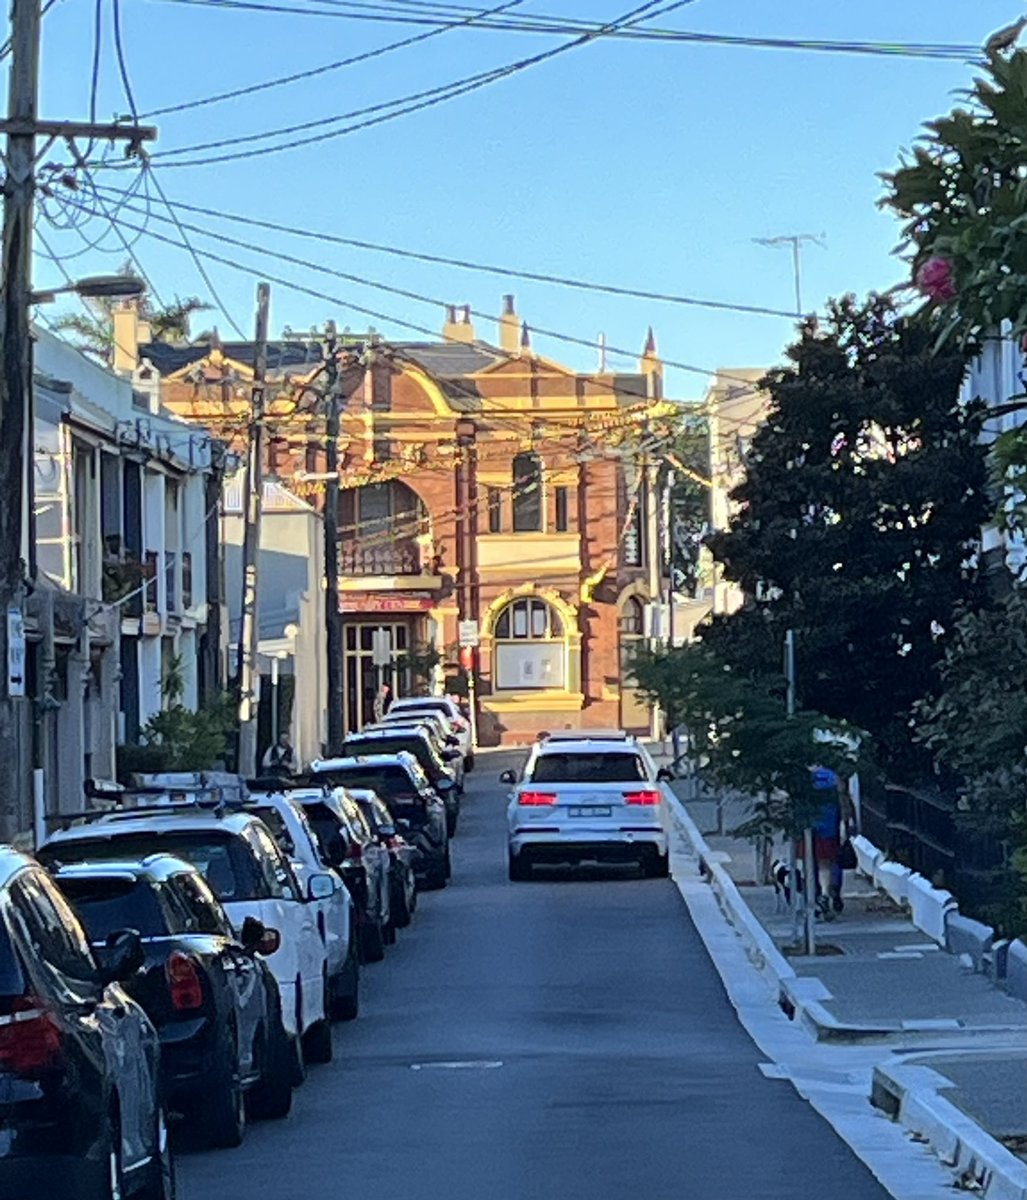 Sunny Streetscene; 
George St Paddington.
#sydneyterracehouses on both side, close with wires & poles to left, setback with front gardens & new street trees to right.
Vista closed by civic architecture at end
#publicsydney